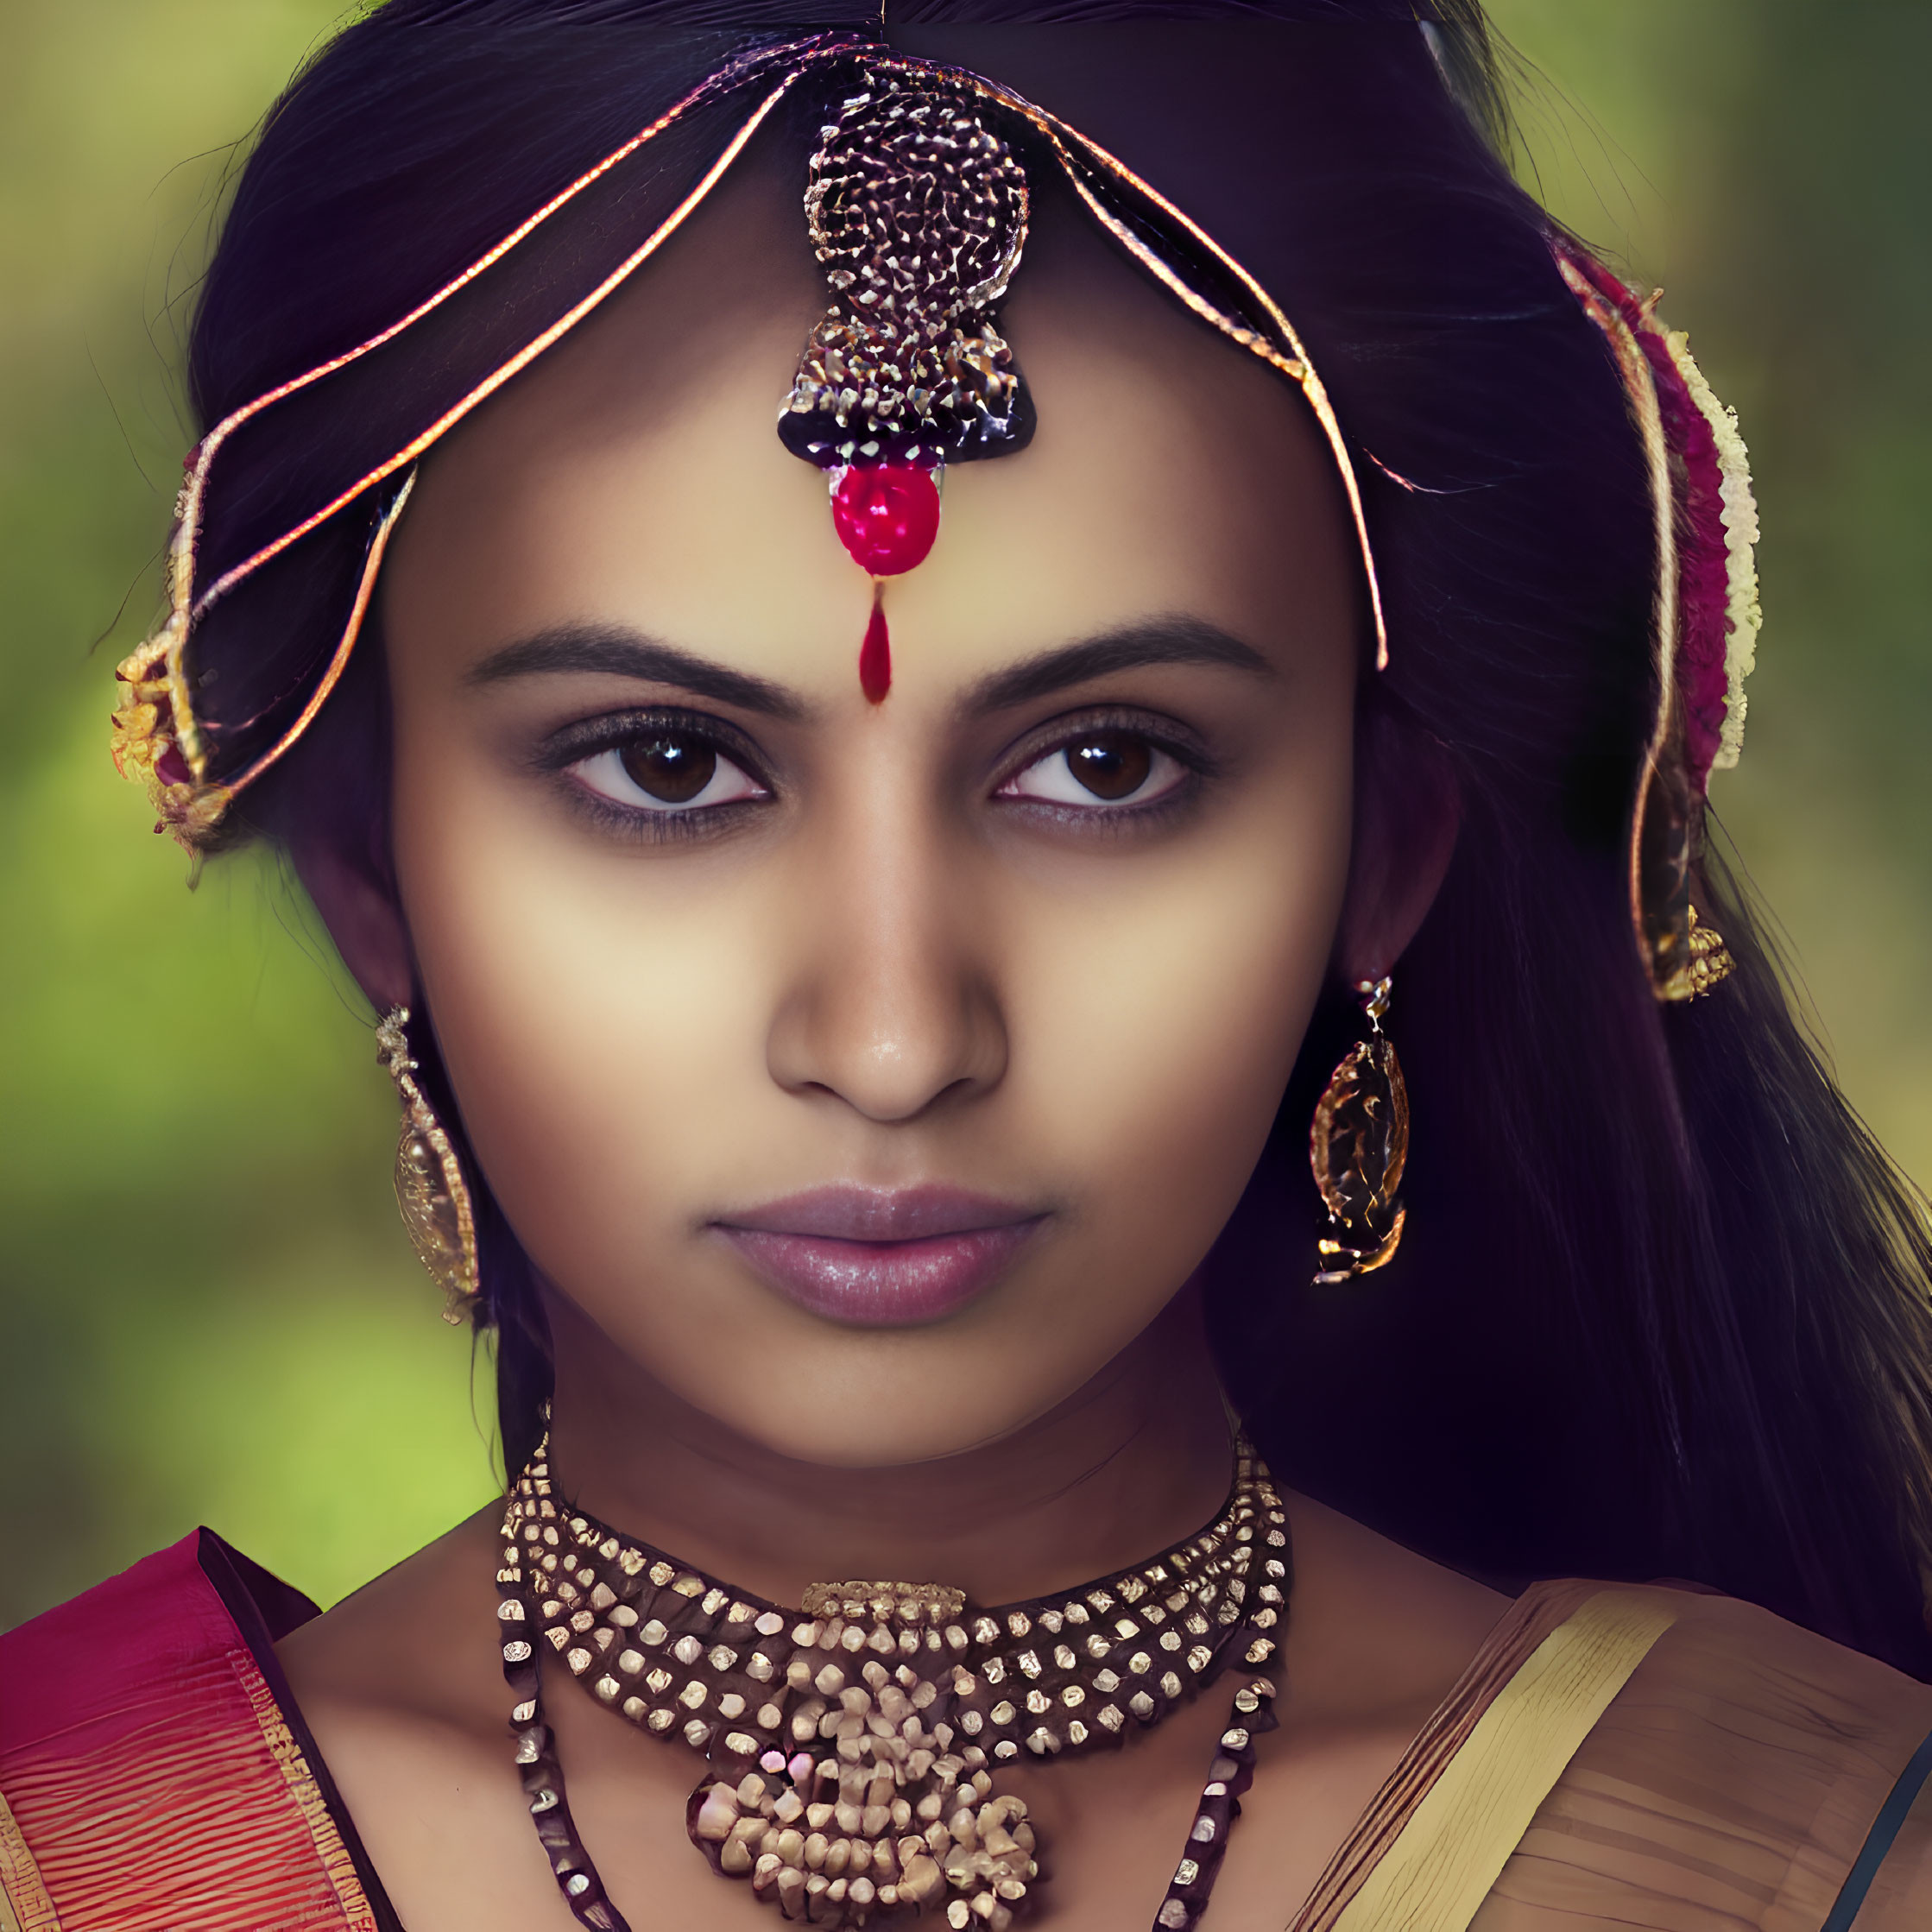 Traditional Indian jewelry on woman with maang tikka, earrings, necklace, red bindi, and